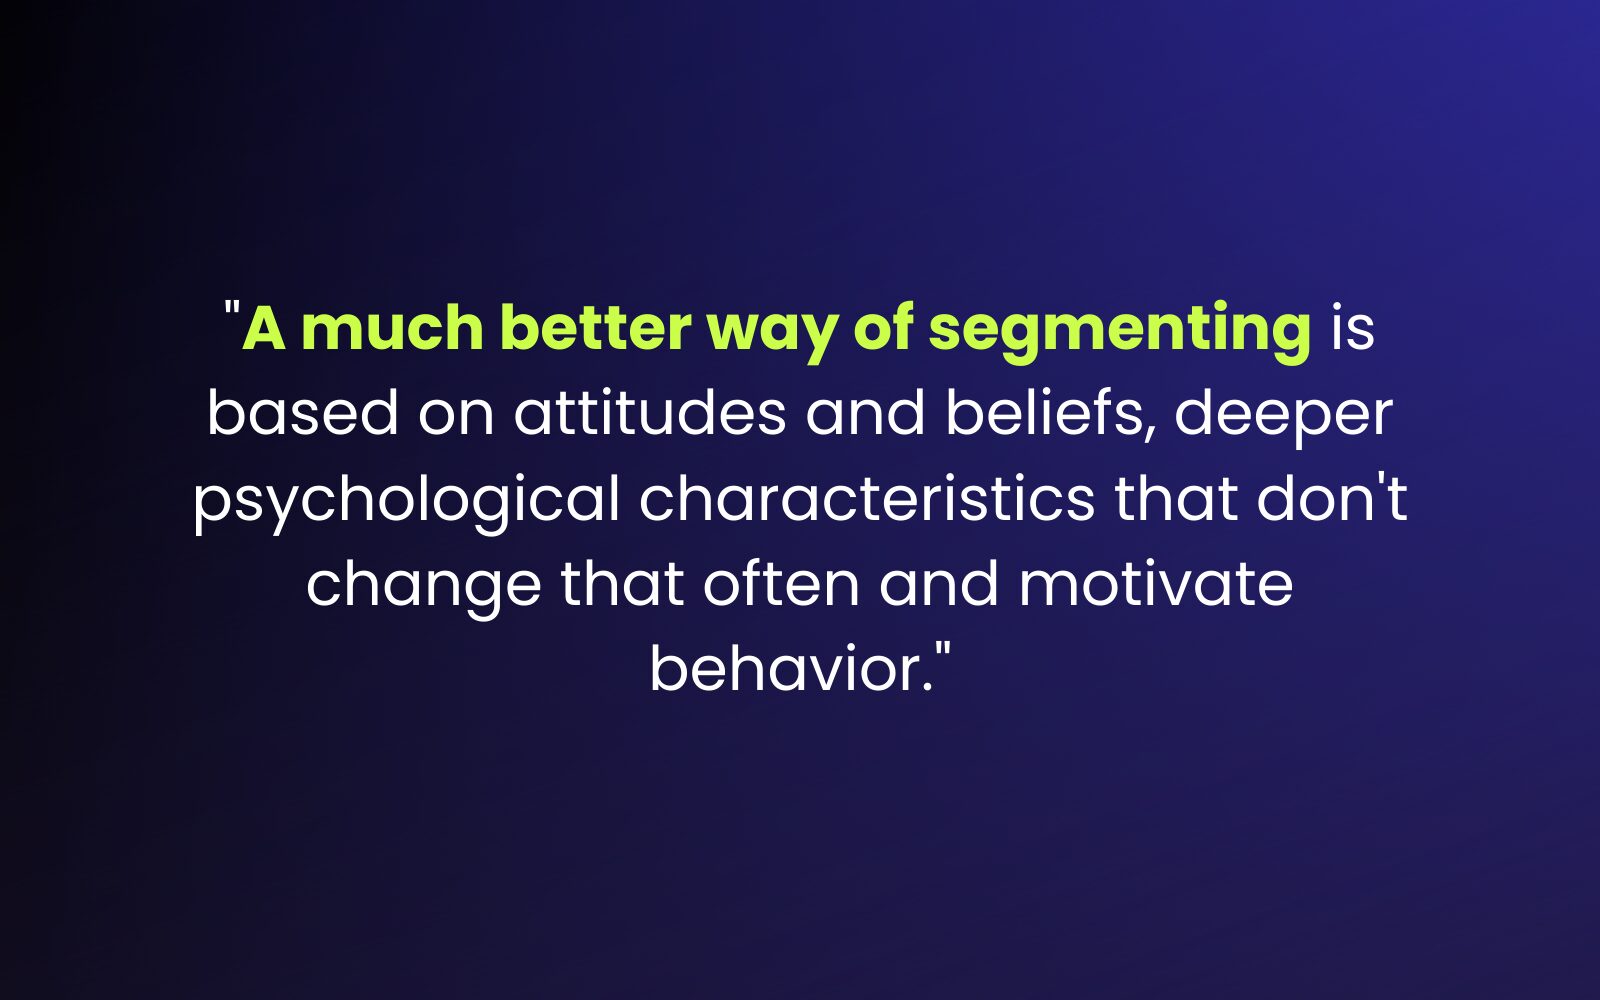 "A much better way of segmenting is based on attitudes and beliefs, deeper psychological characteristics that don't change that often and motivate behavior." 